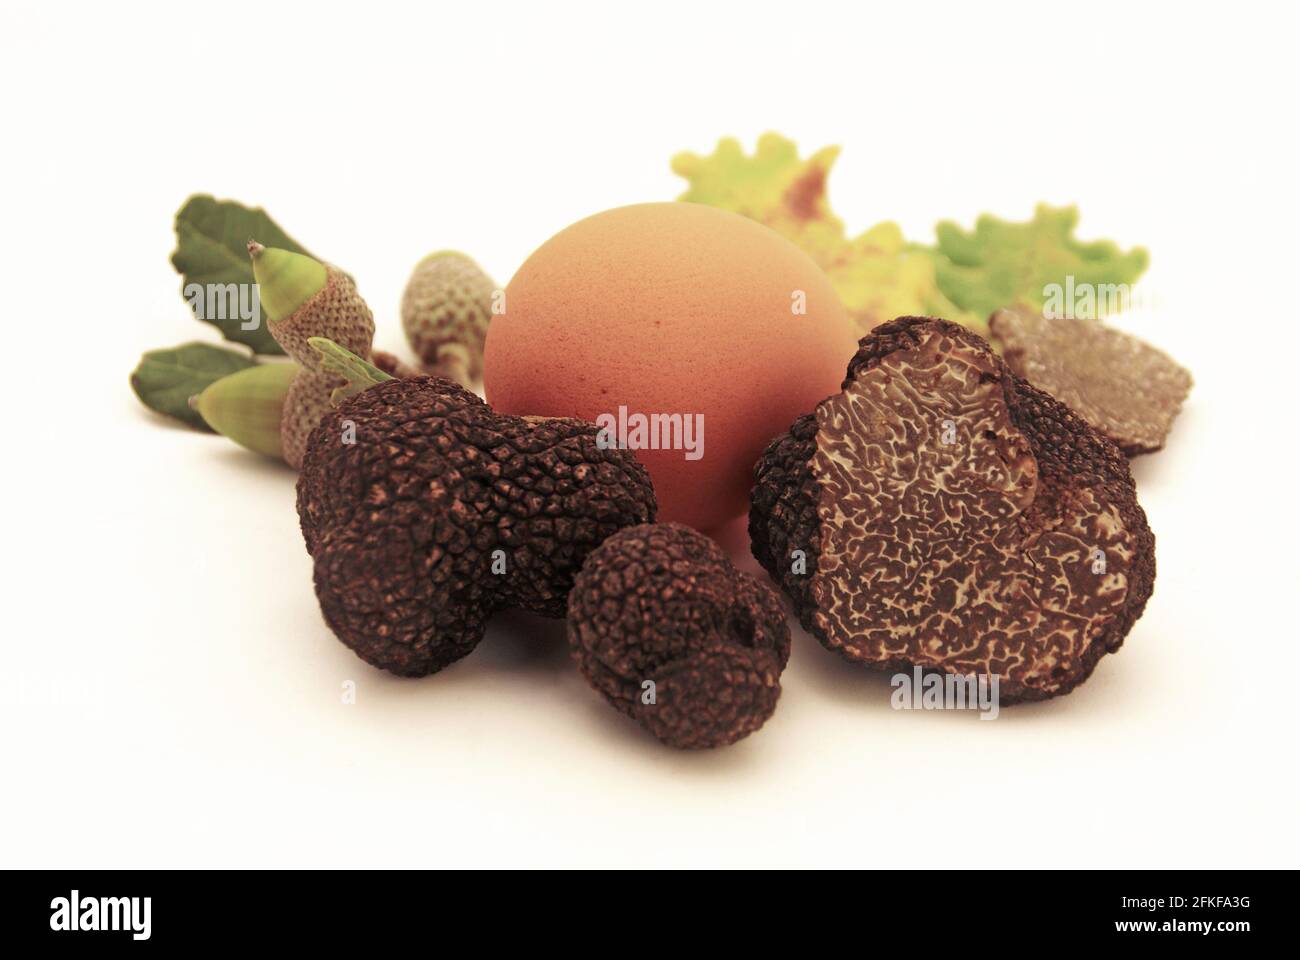 Egg and oak truffles, one of which is shown in section. Stock Photo